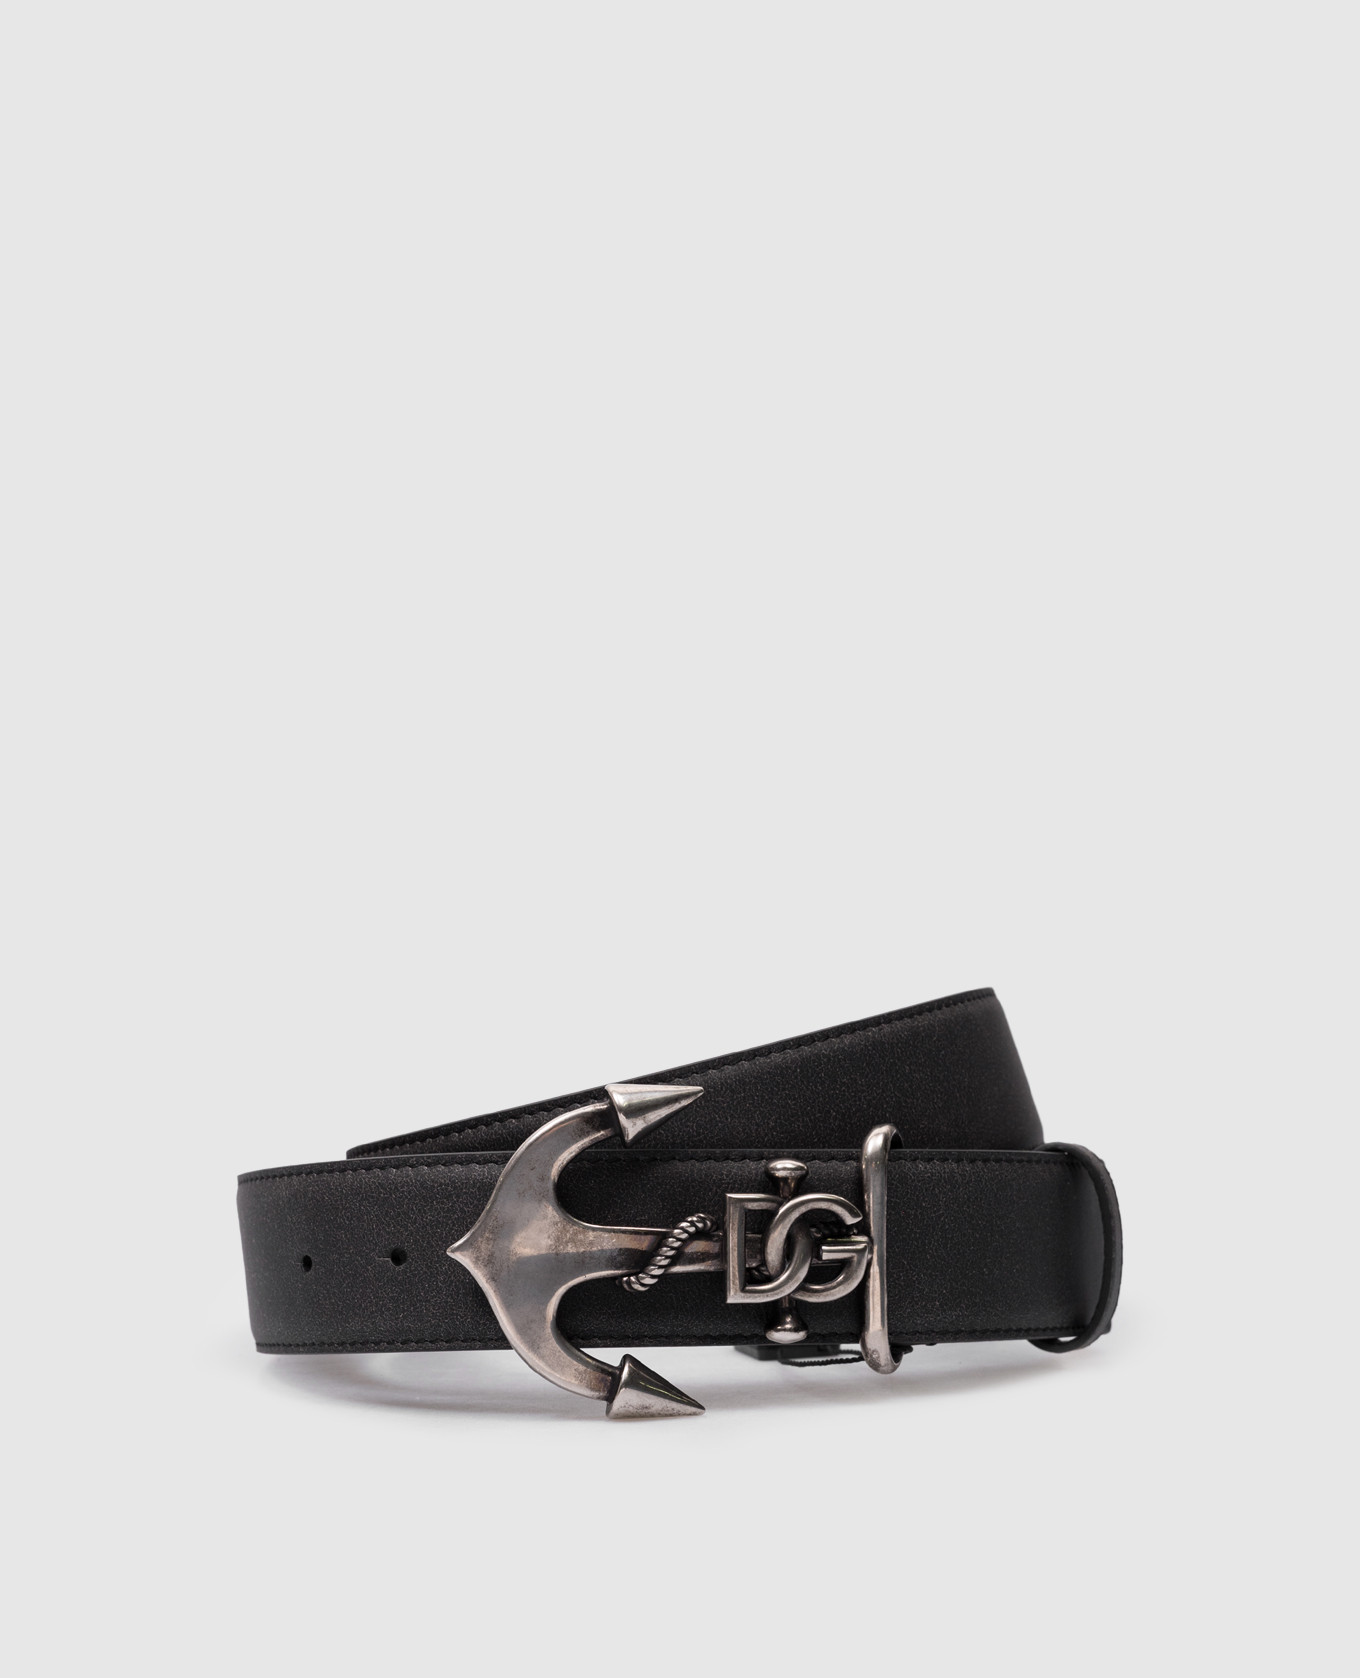 Anchor buckle leather belt